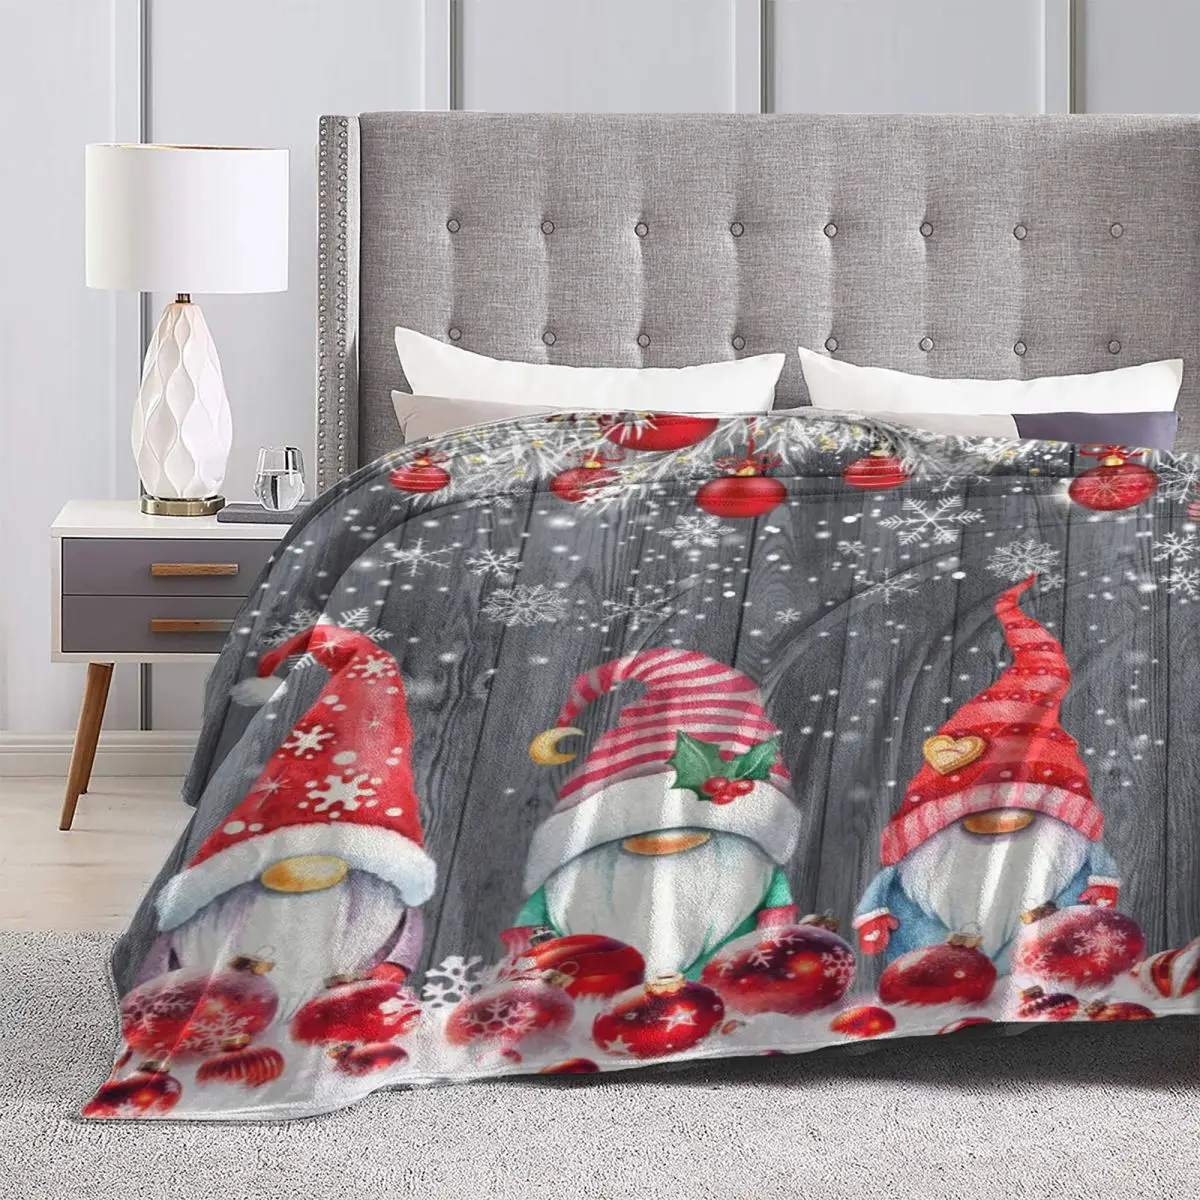 Christmas Microfiber Super Warm Blankets Snow Xmas Gift Airplane Travel Bedding Throws Spring Flannel Bedspread Sofa Bed Cover